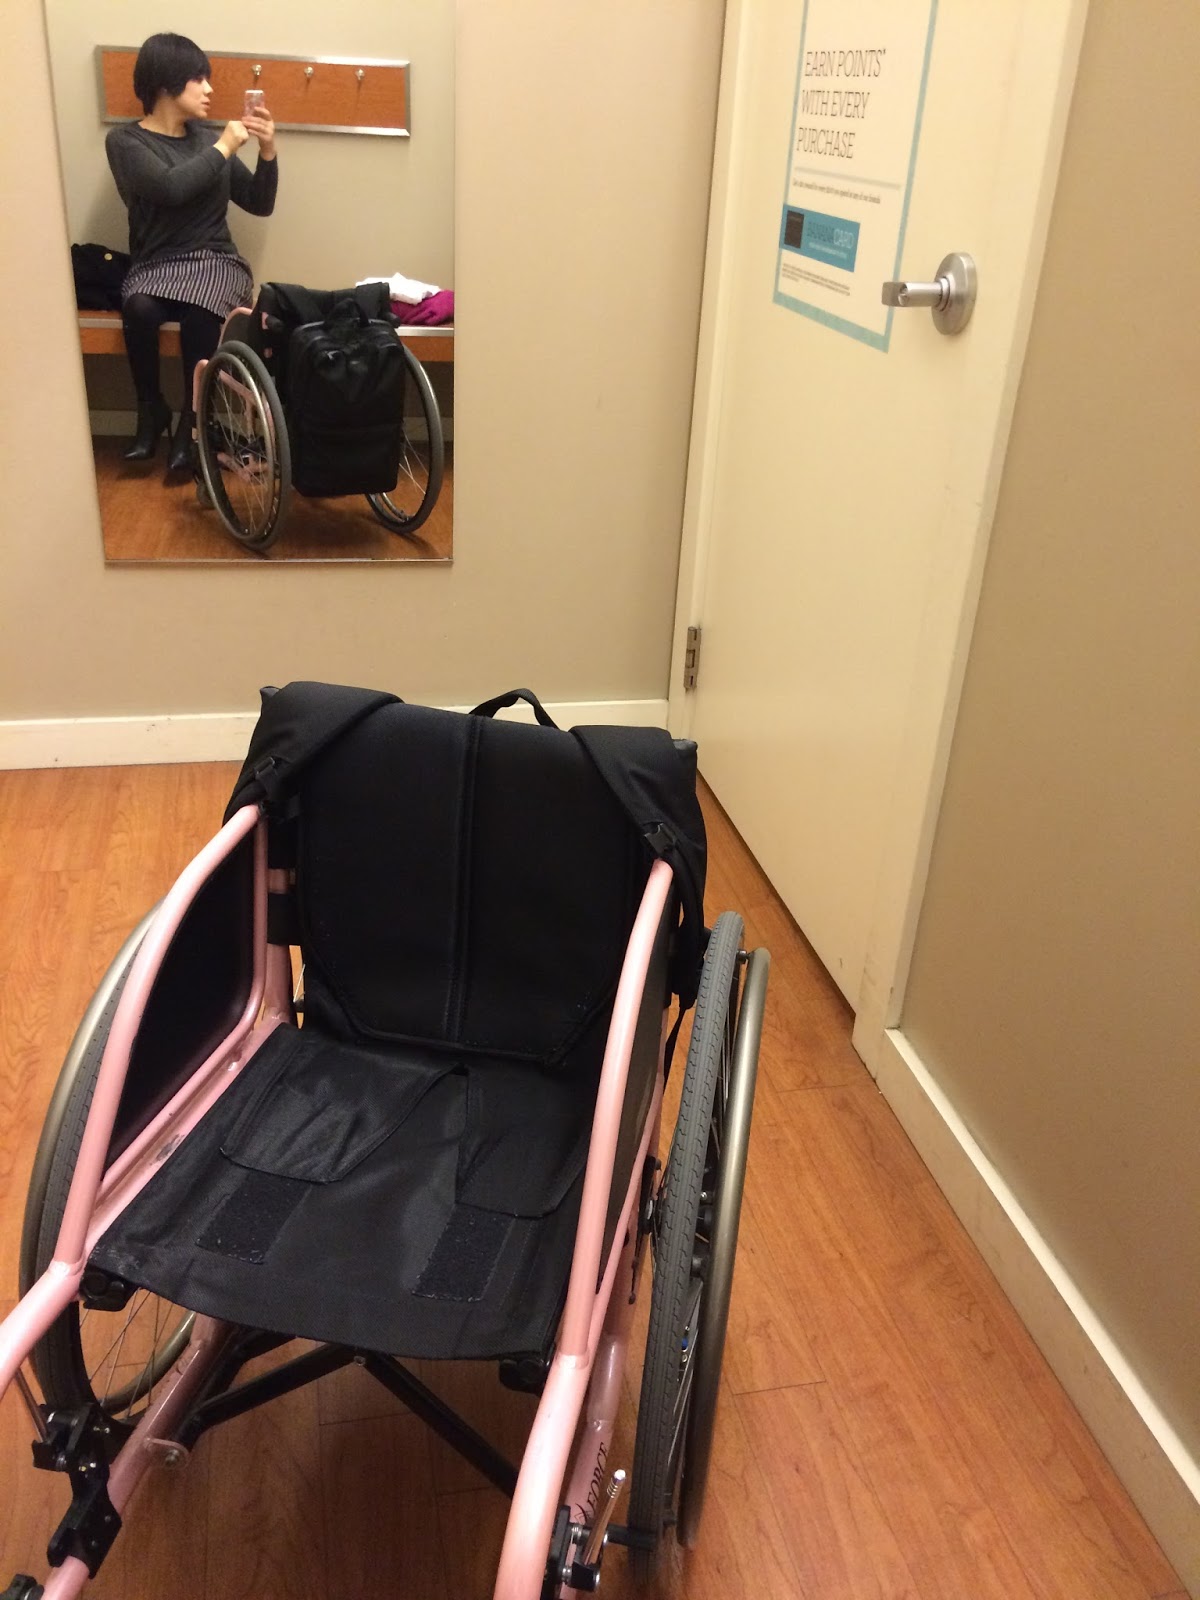 Awesome Fitting Room For Wheelchair Users in the U.S.